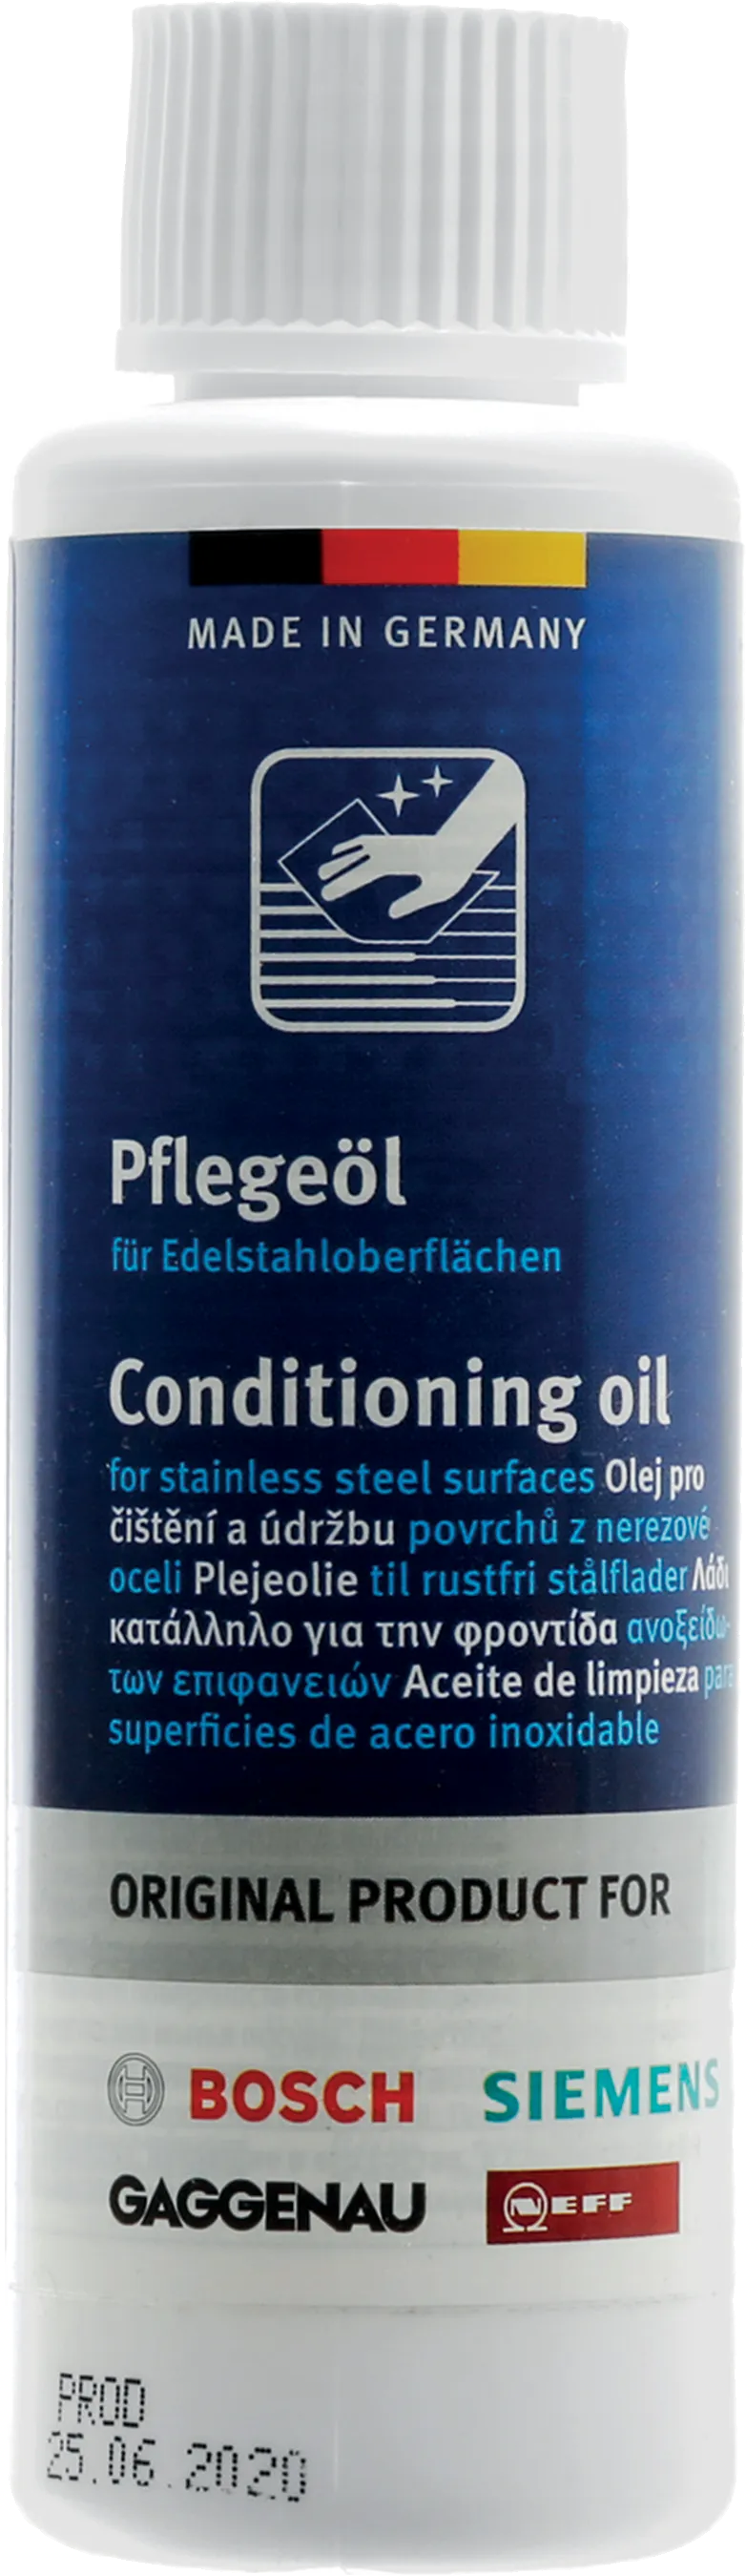 Conditioning Oil for stainless steel surfaces 